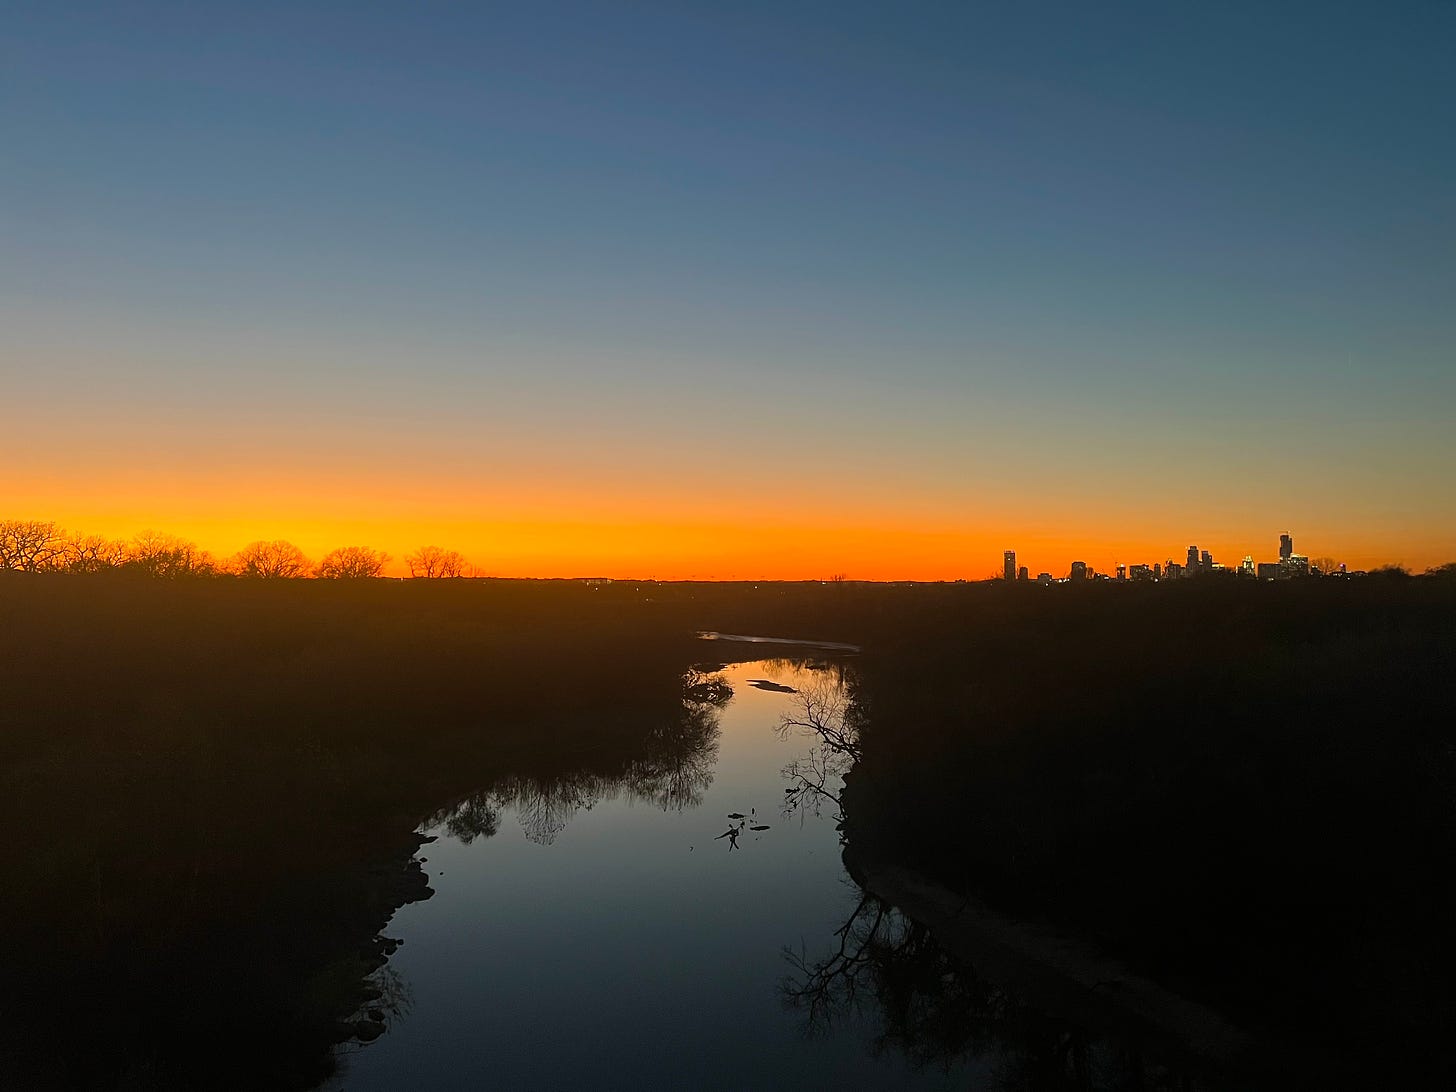 Sunset over Austin, with wild urban river in the foreground and the skyline of downtown silhouetted on the horizon